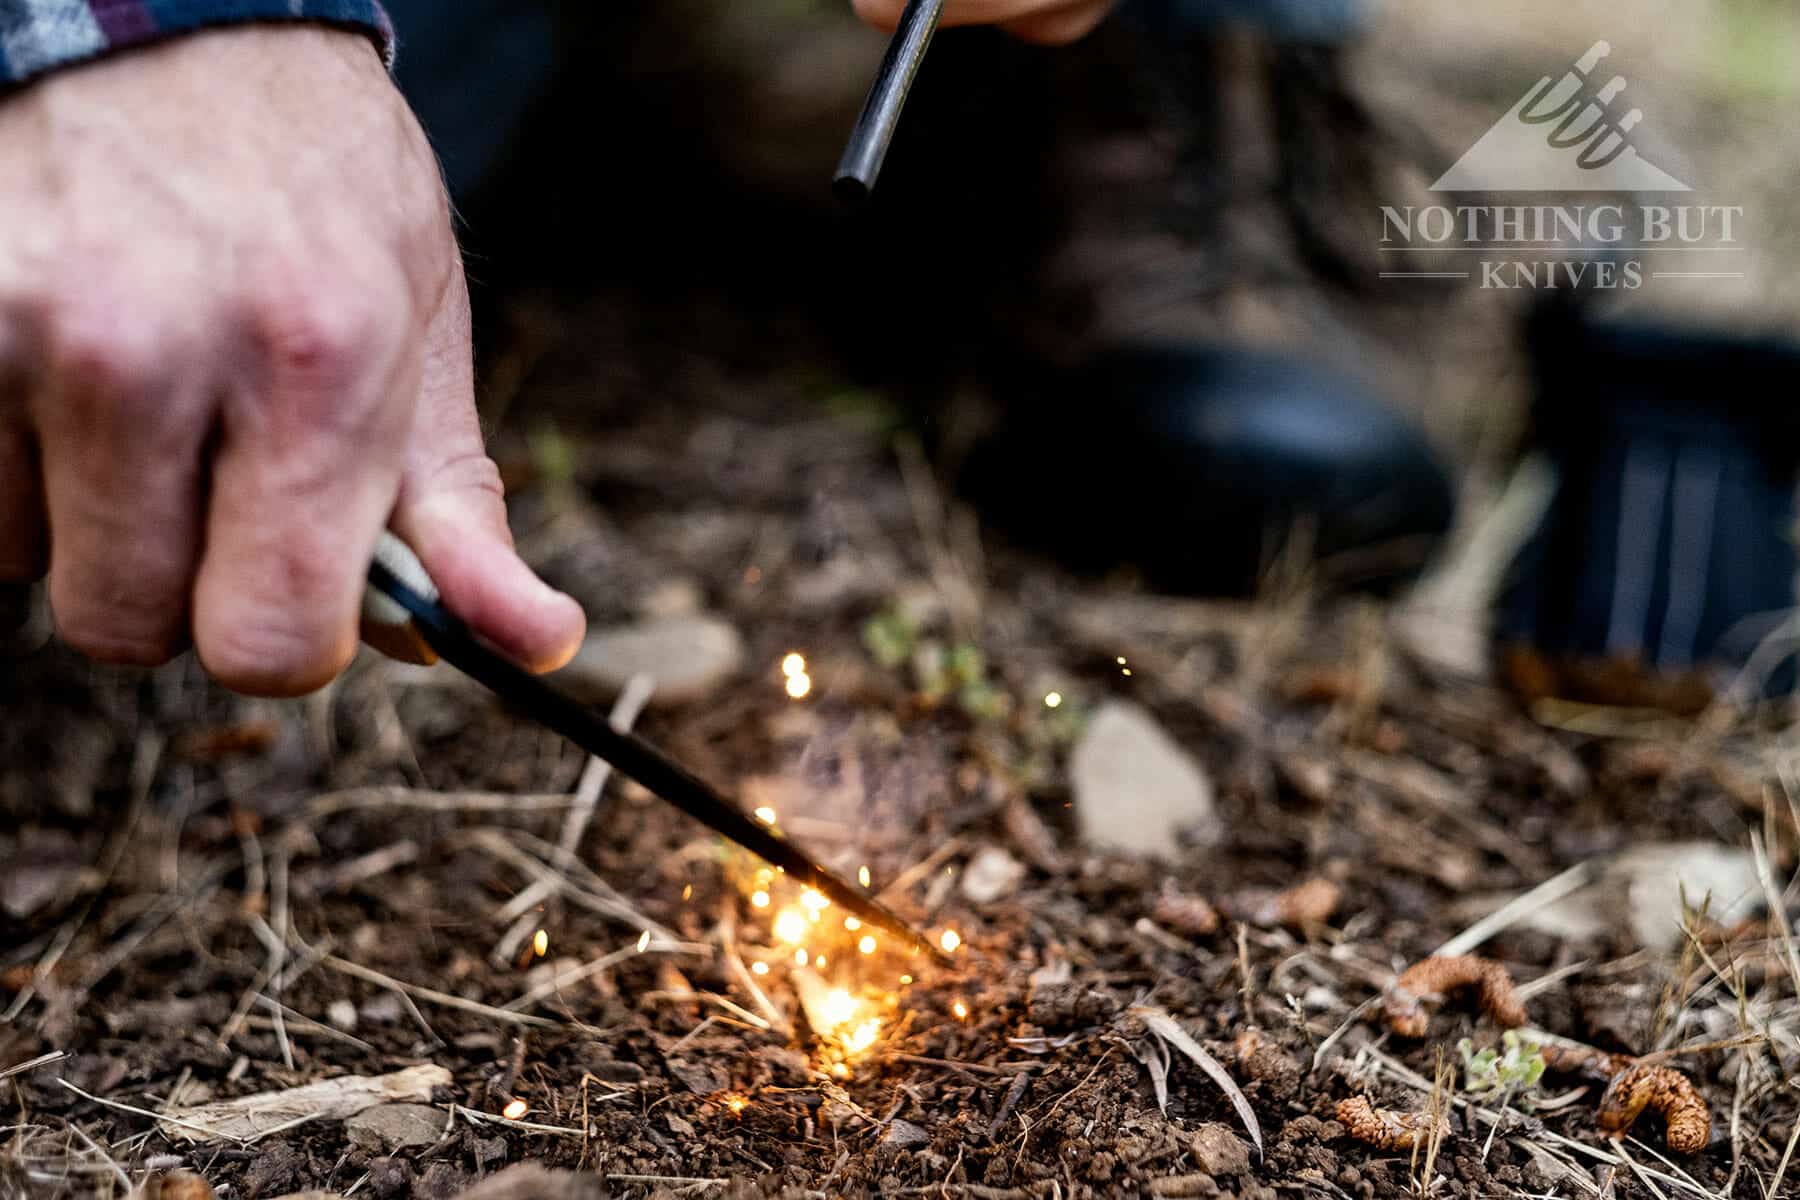 It takes a lot of effort to see anything light up when trying to throw sparks with a ferro rod. 